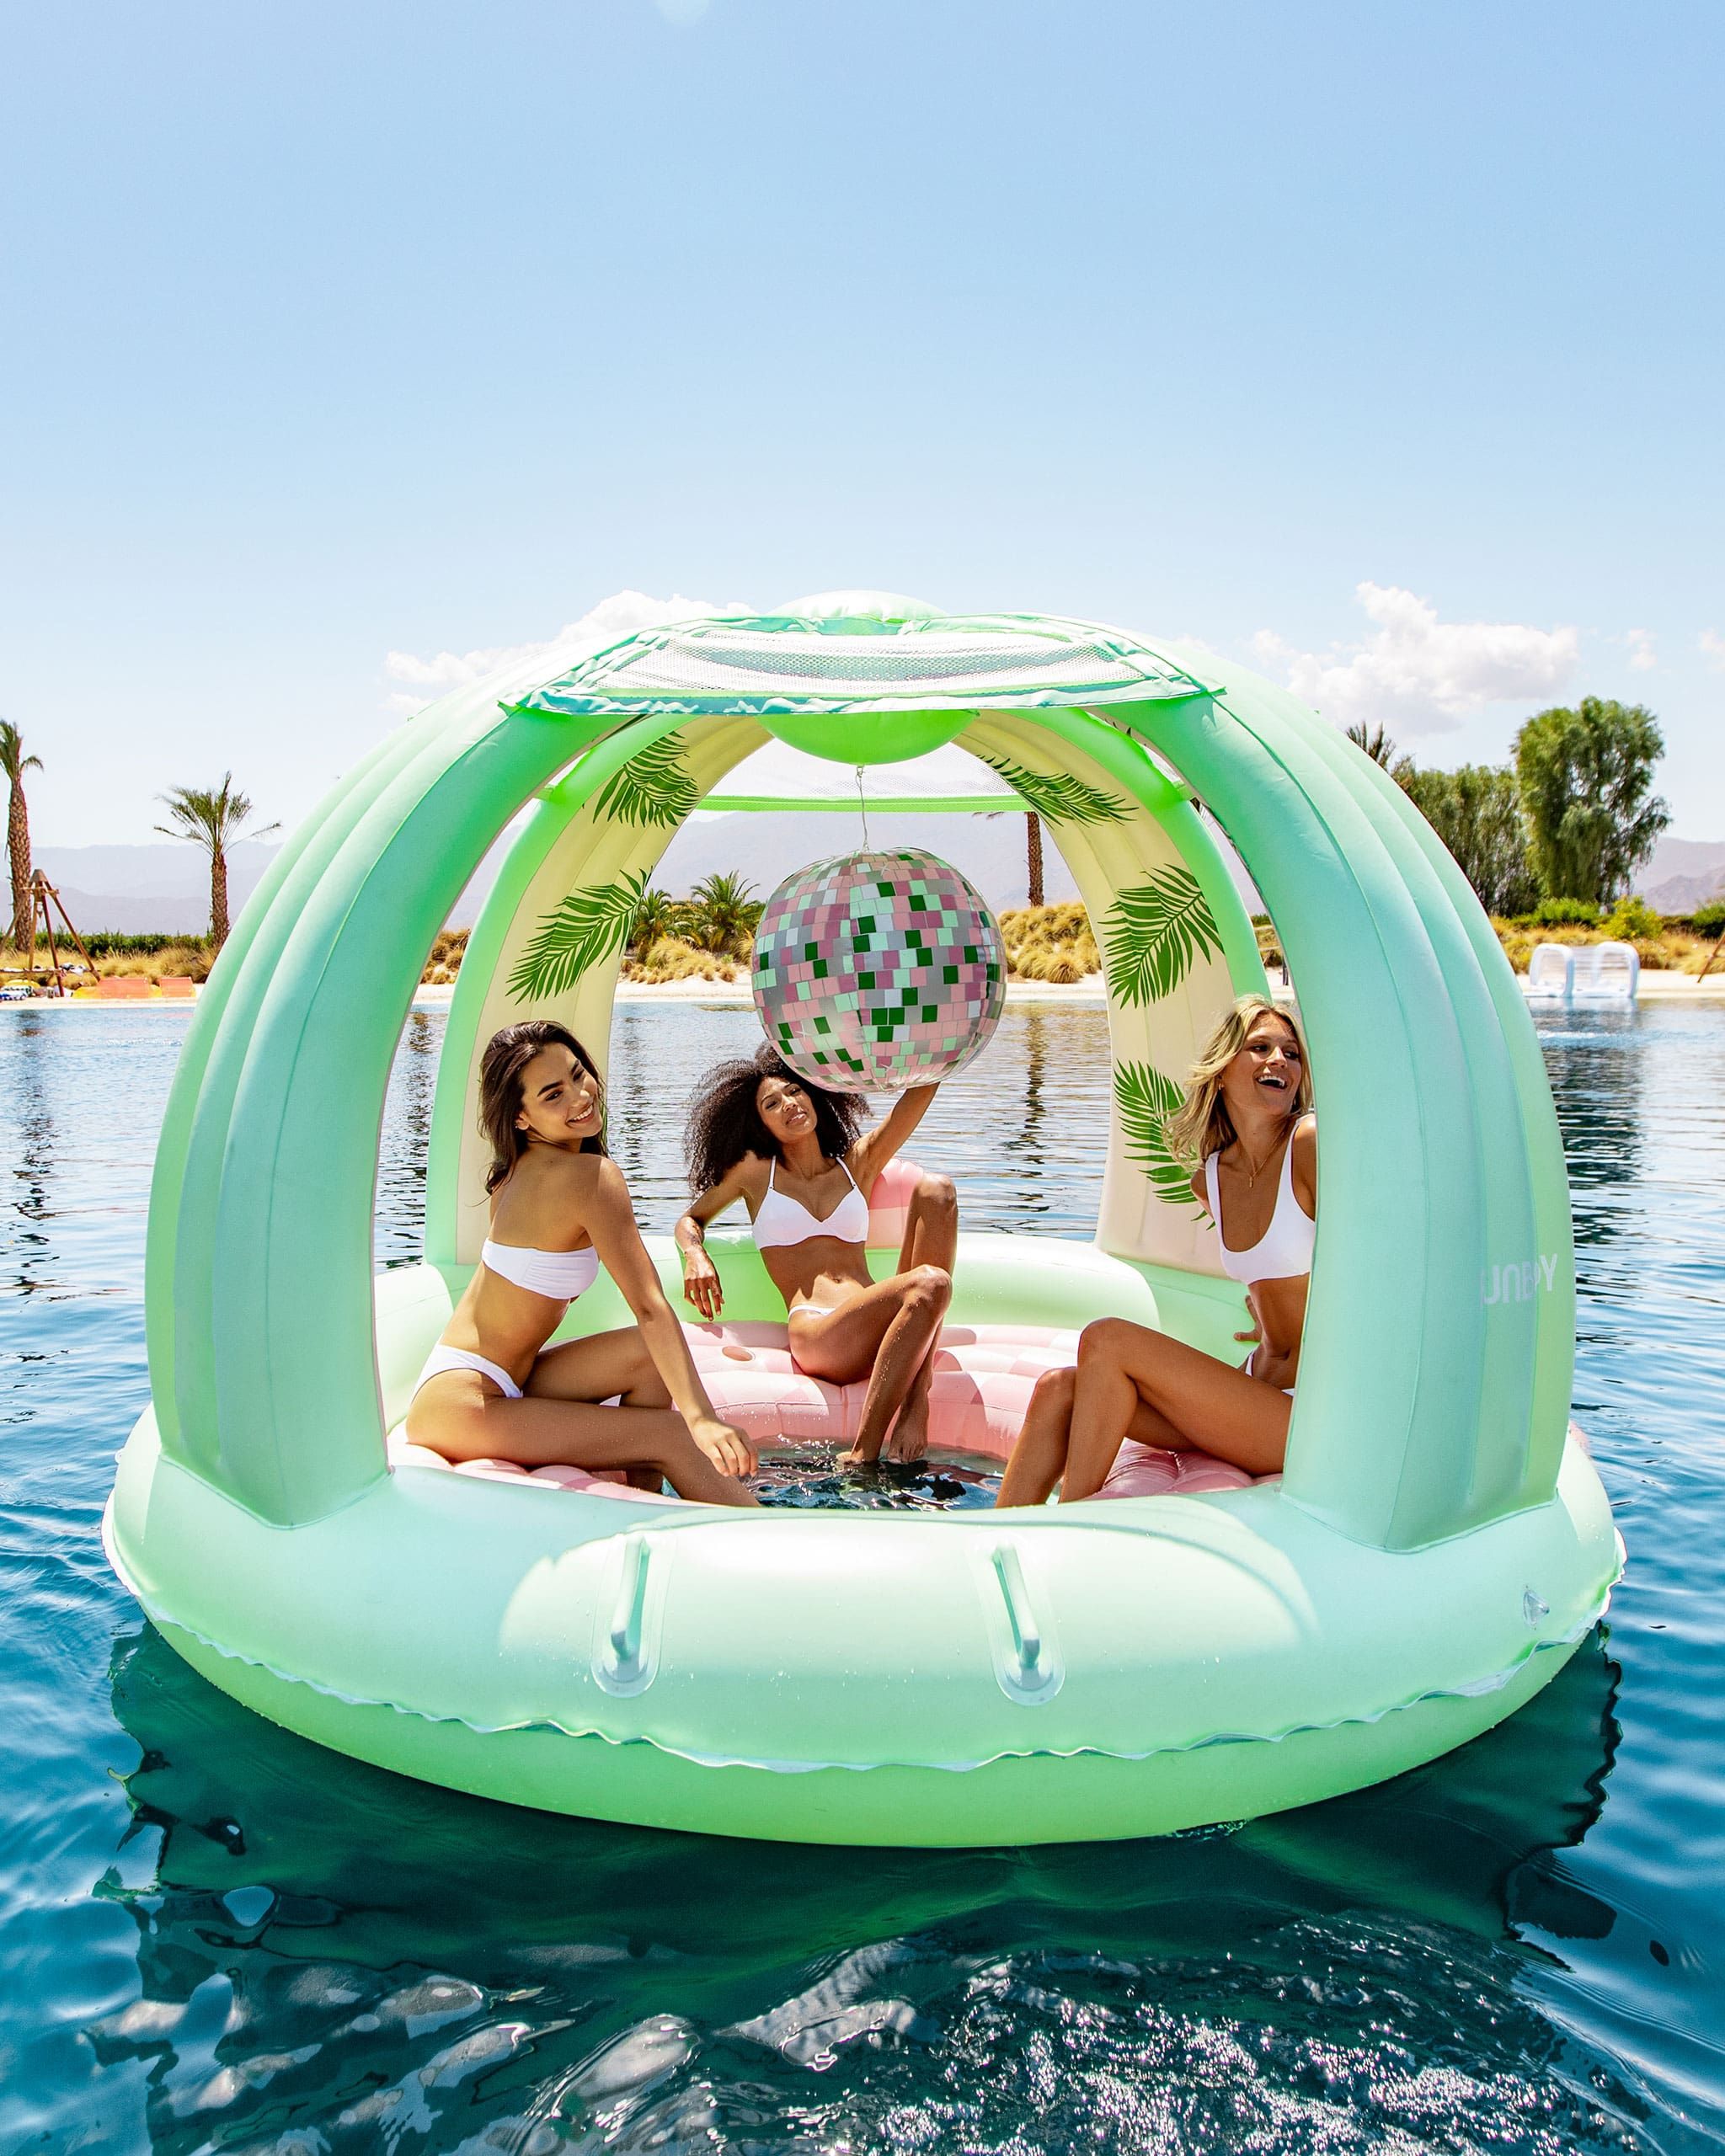 Inflatable Giant Swim Pool Floats Raft Swimming Fun Water Sports Beach Toy US 